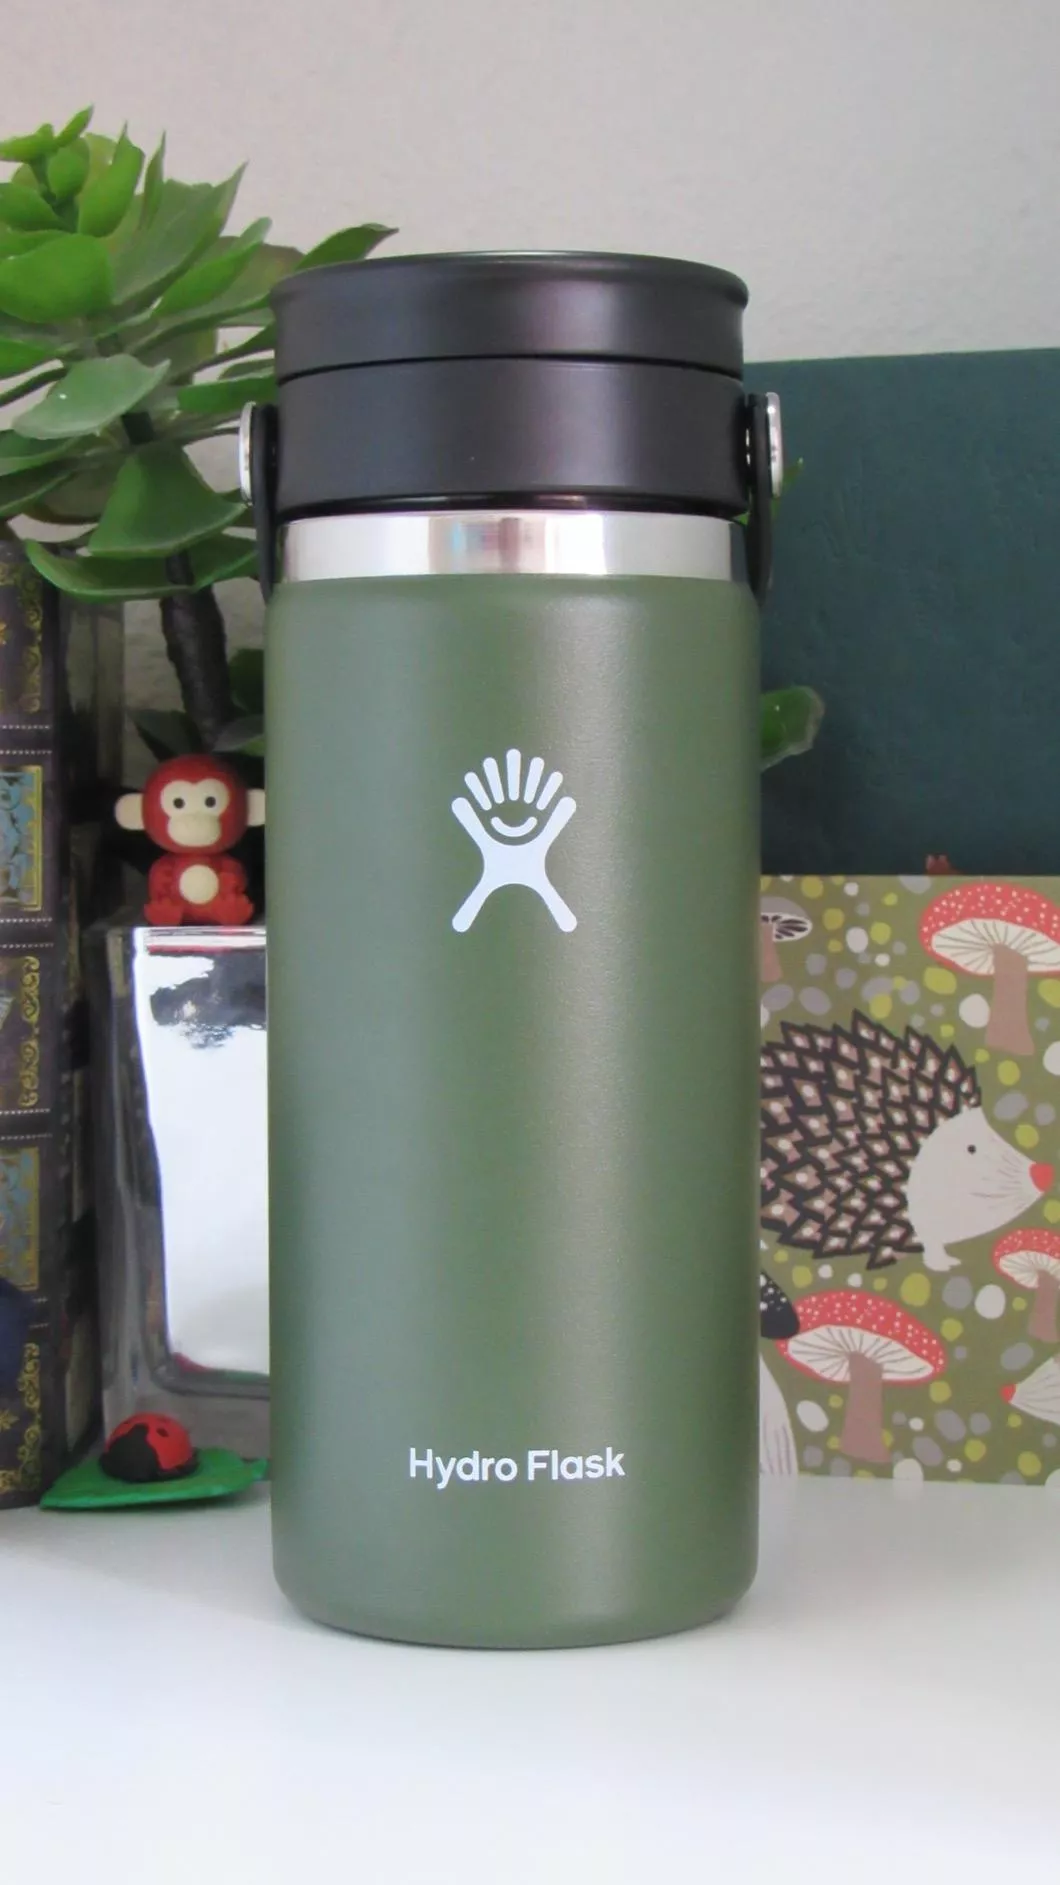 Hydro Flask 16 oz Wide Mouth Bottle with Flex Sip Lid Olive